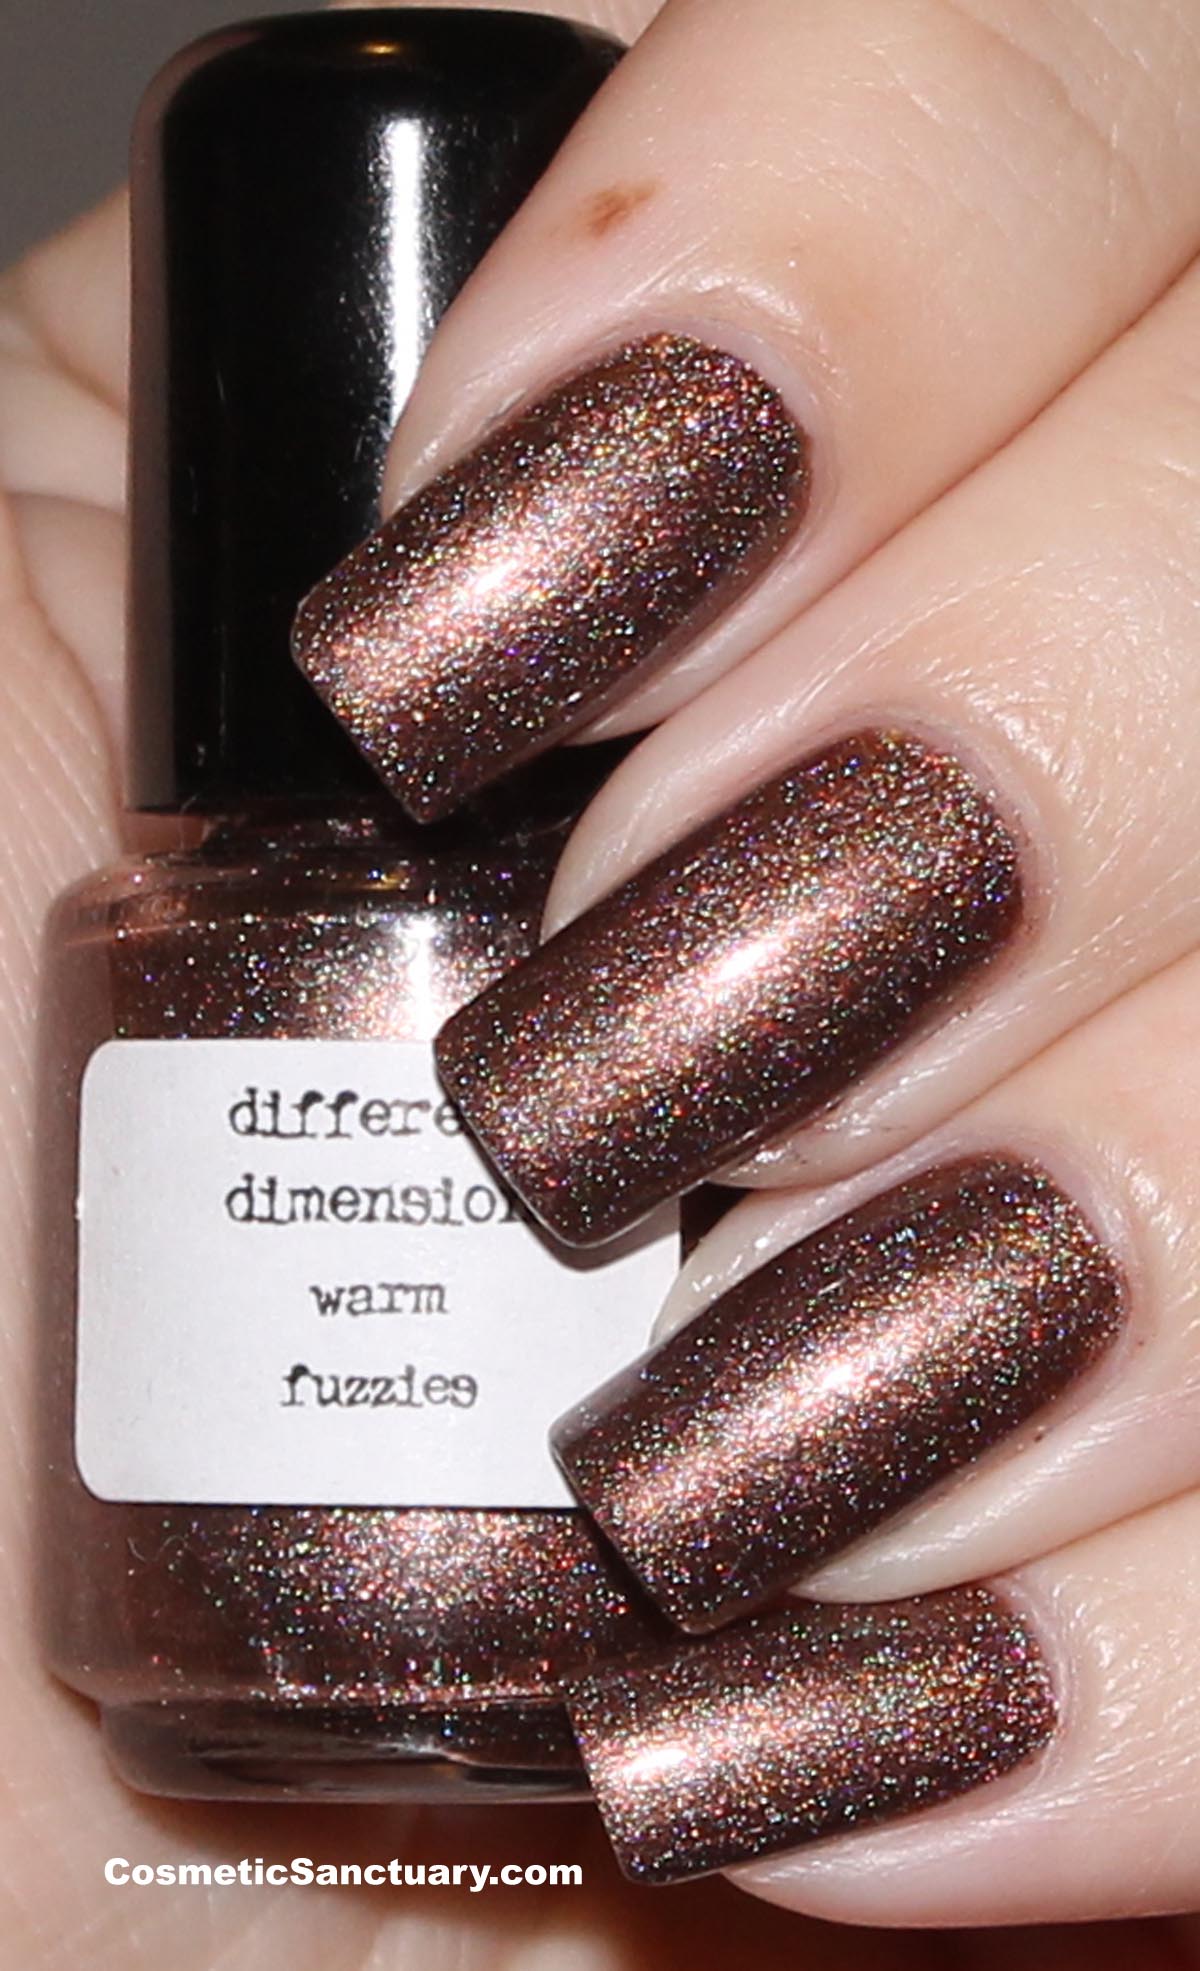 Different Dimension Nail Lacquer Swatches and Review